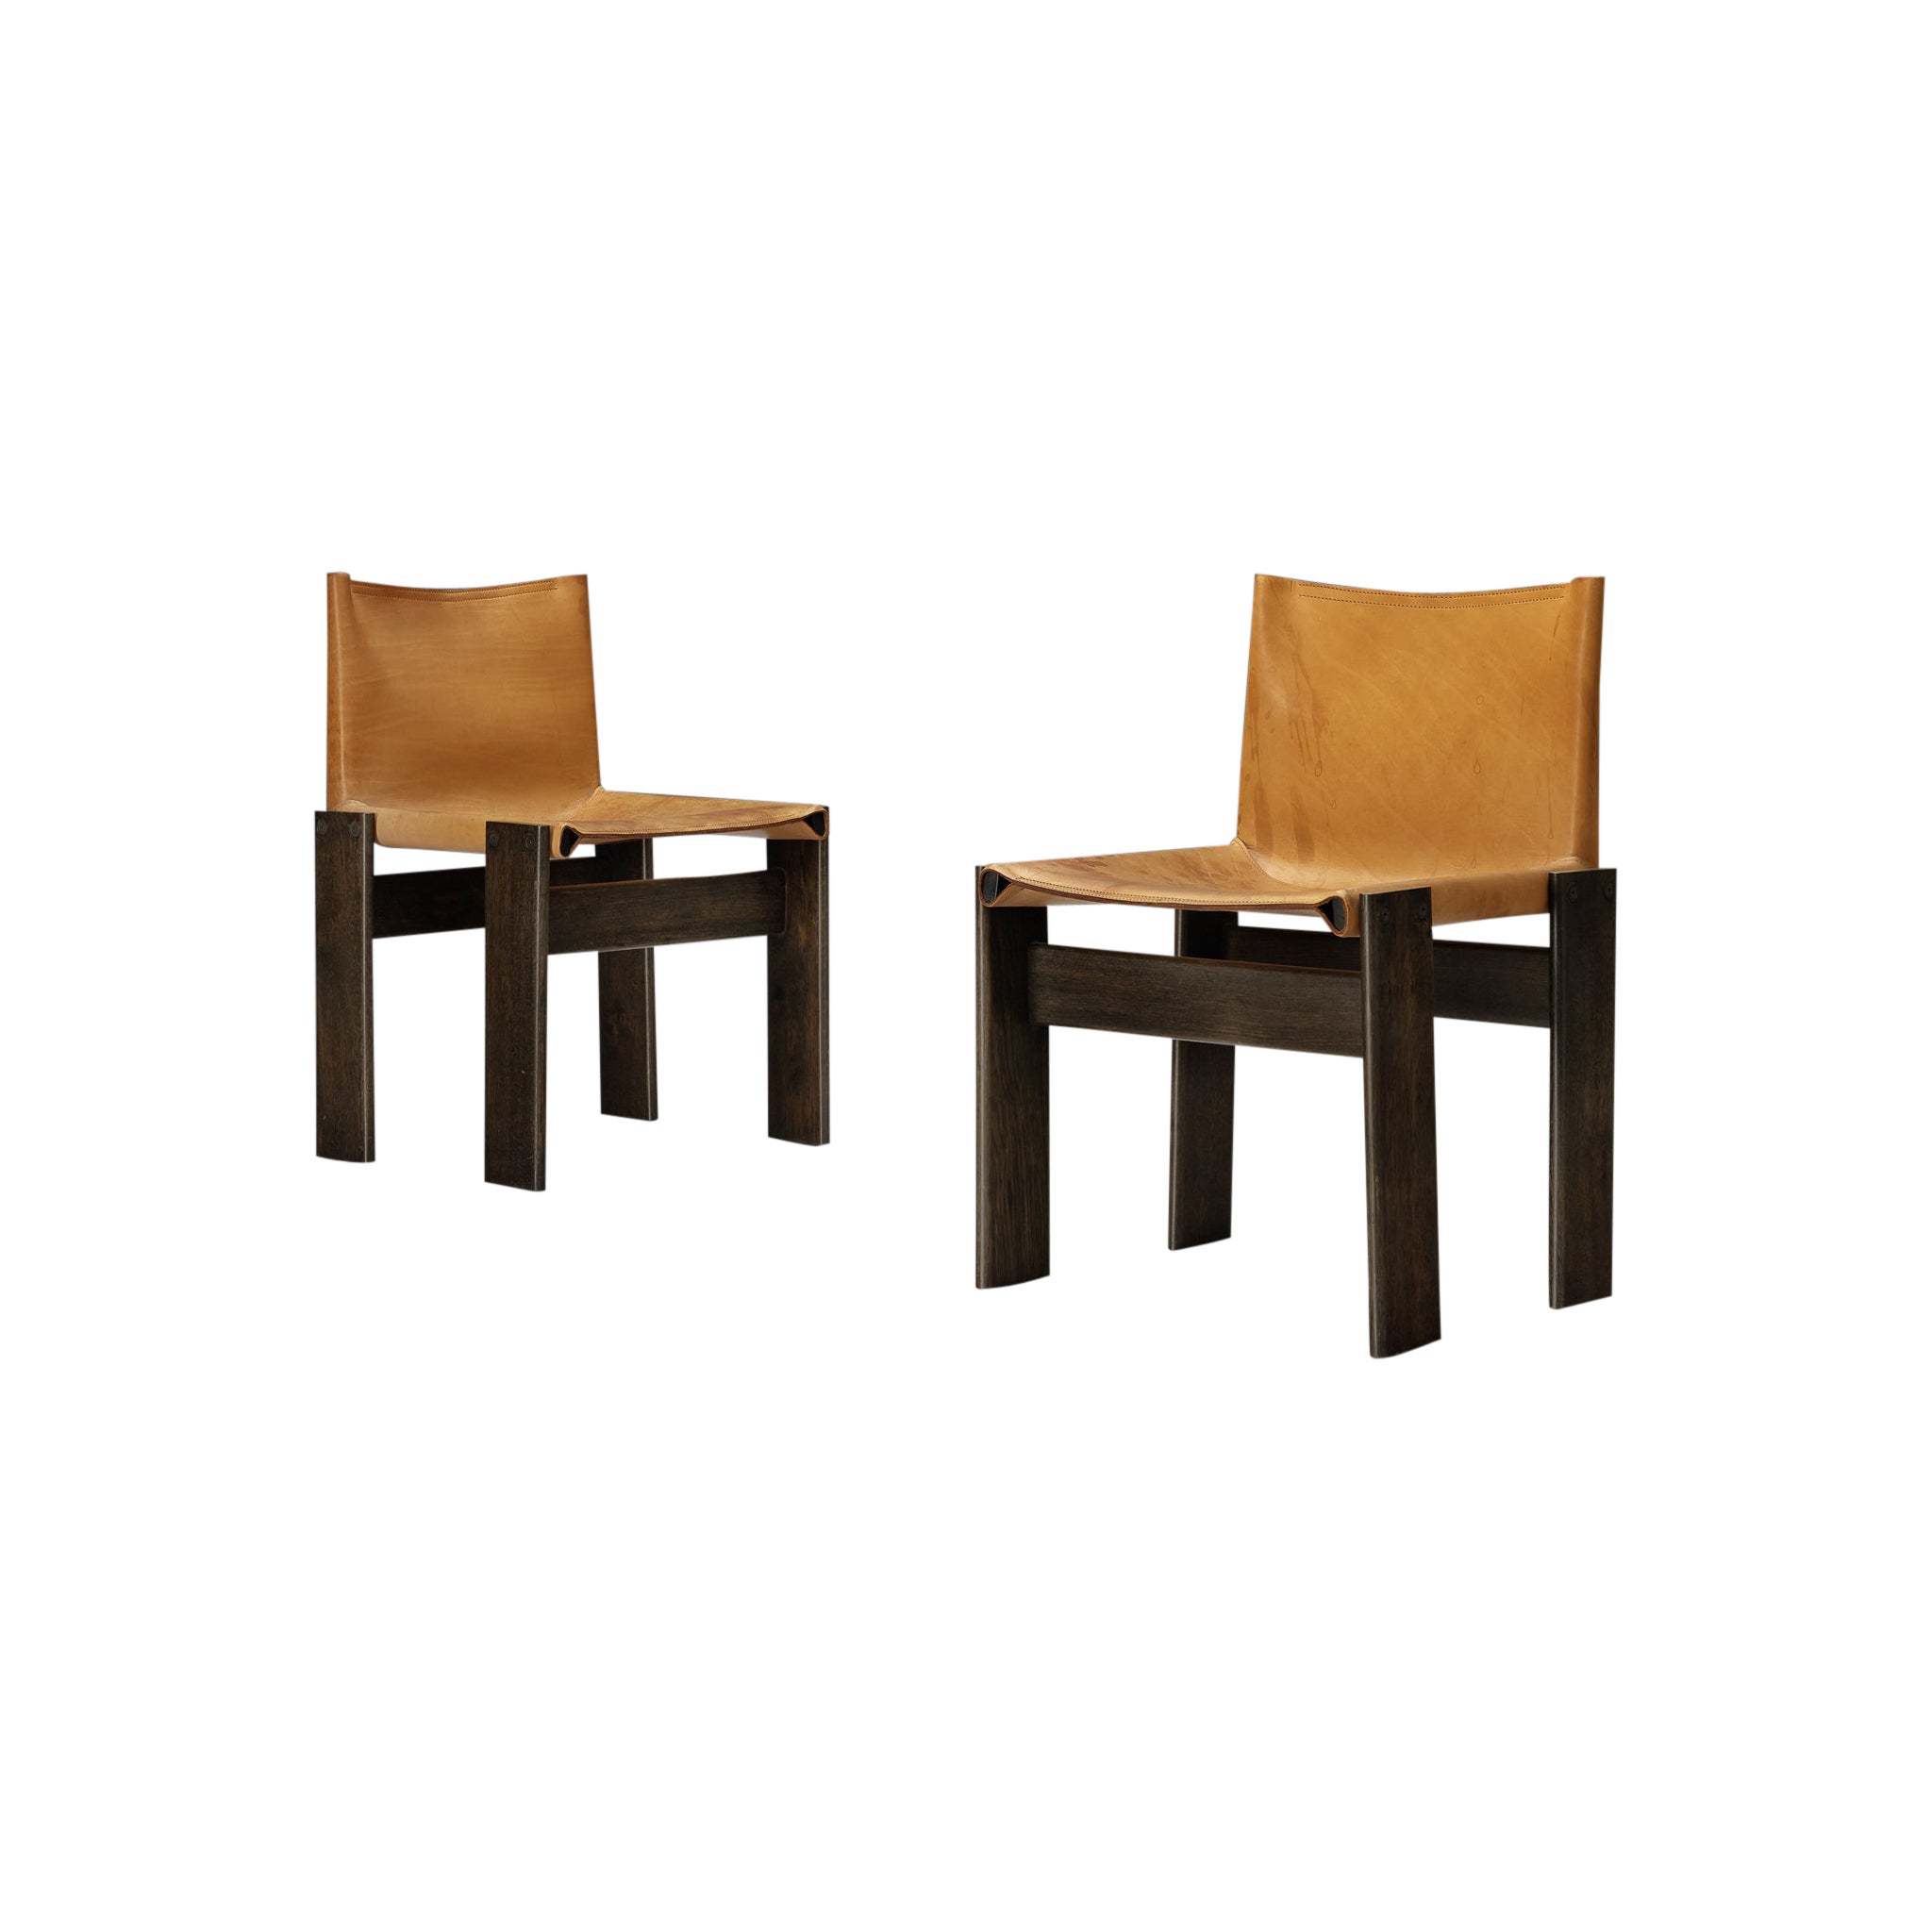 Afra & Tobia Scarpa 'Monk' Chairs in Cognac Leather